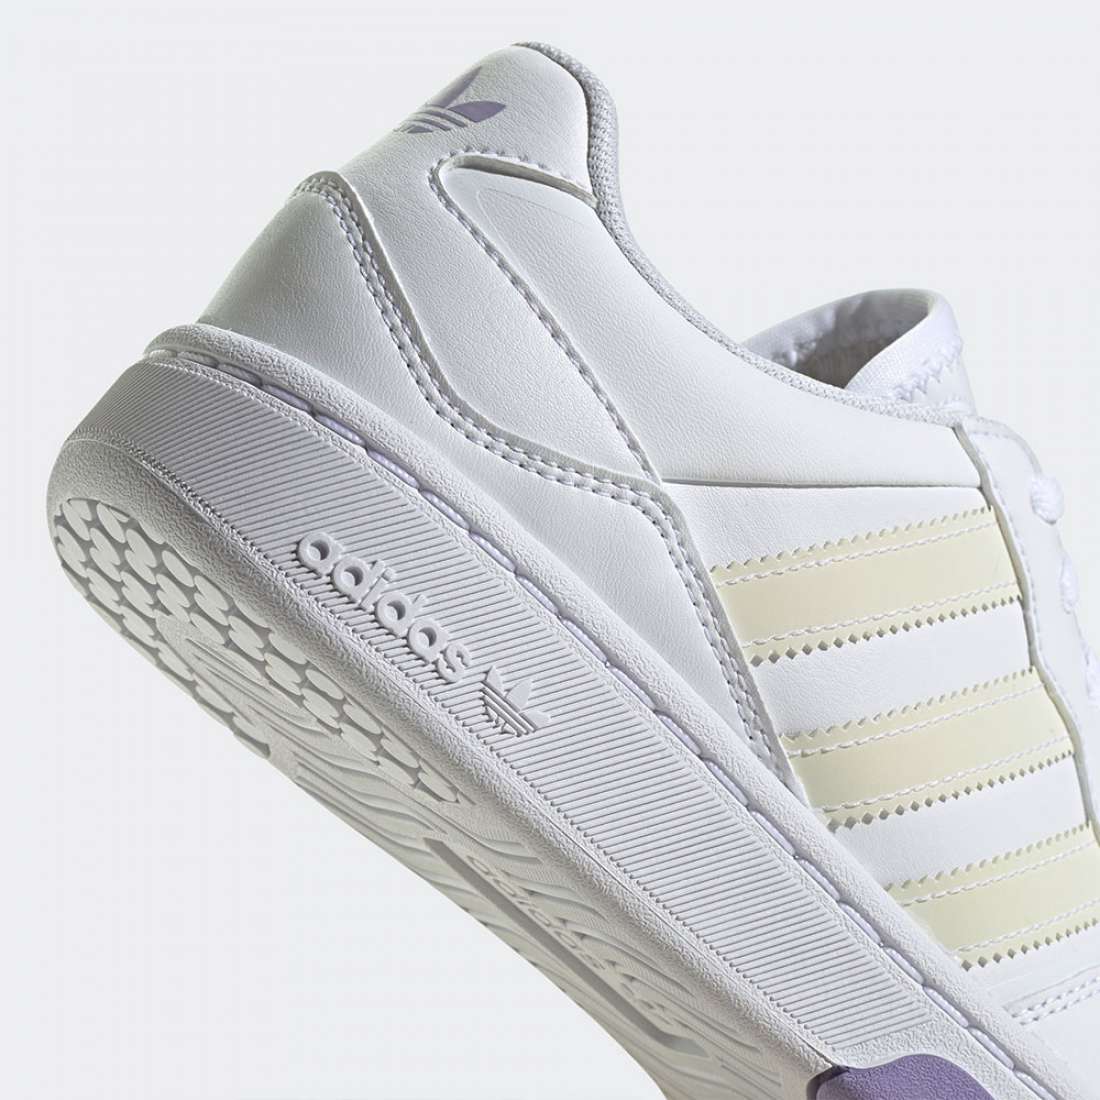 ADIDAS COURTIC FTWWHT/MAGLIL/FTWWHT